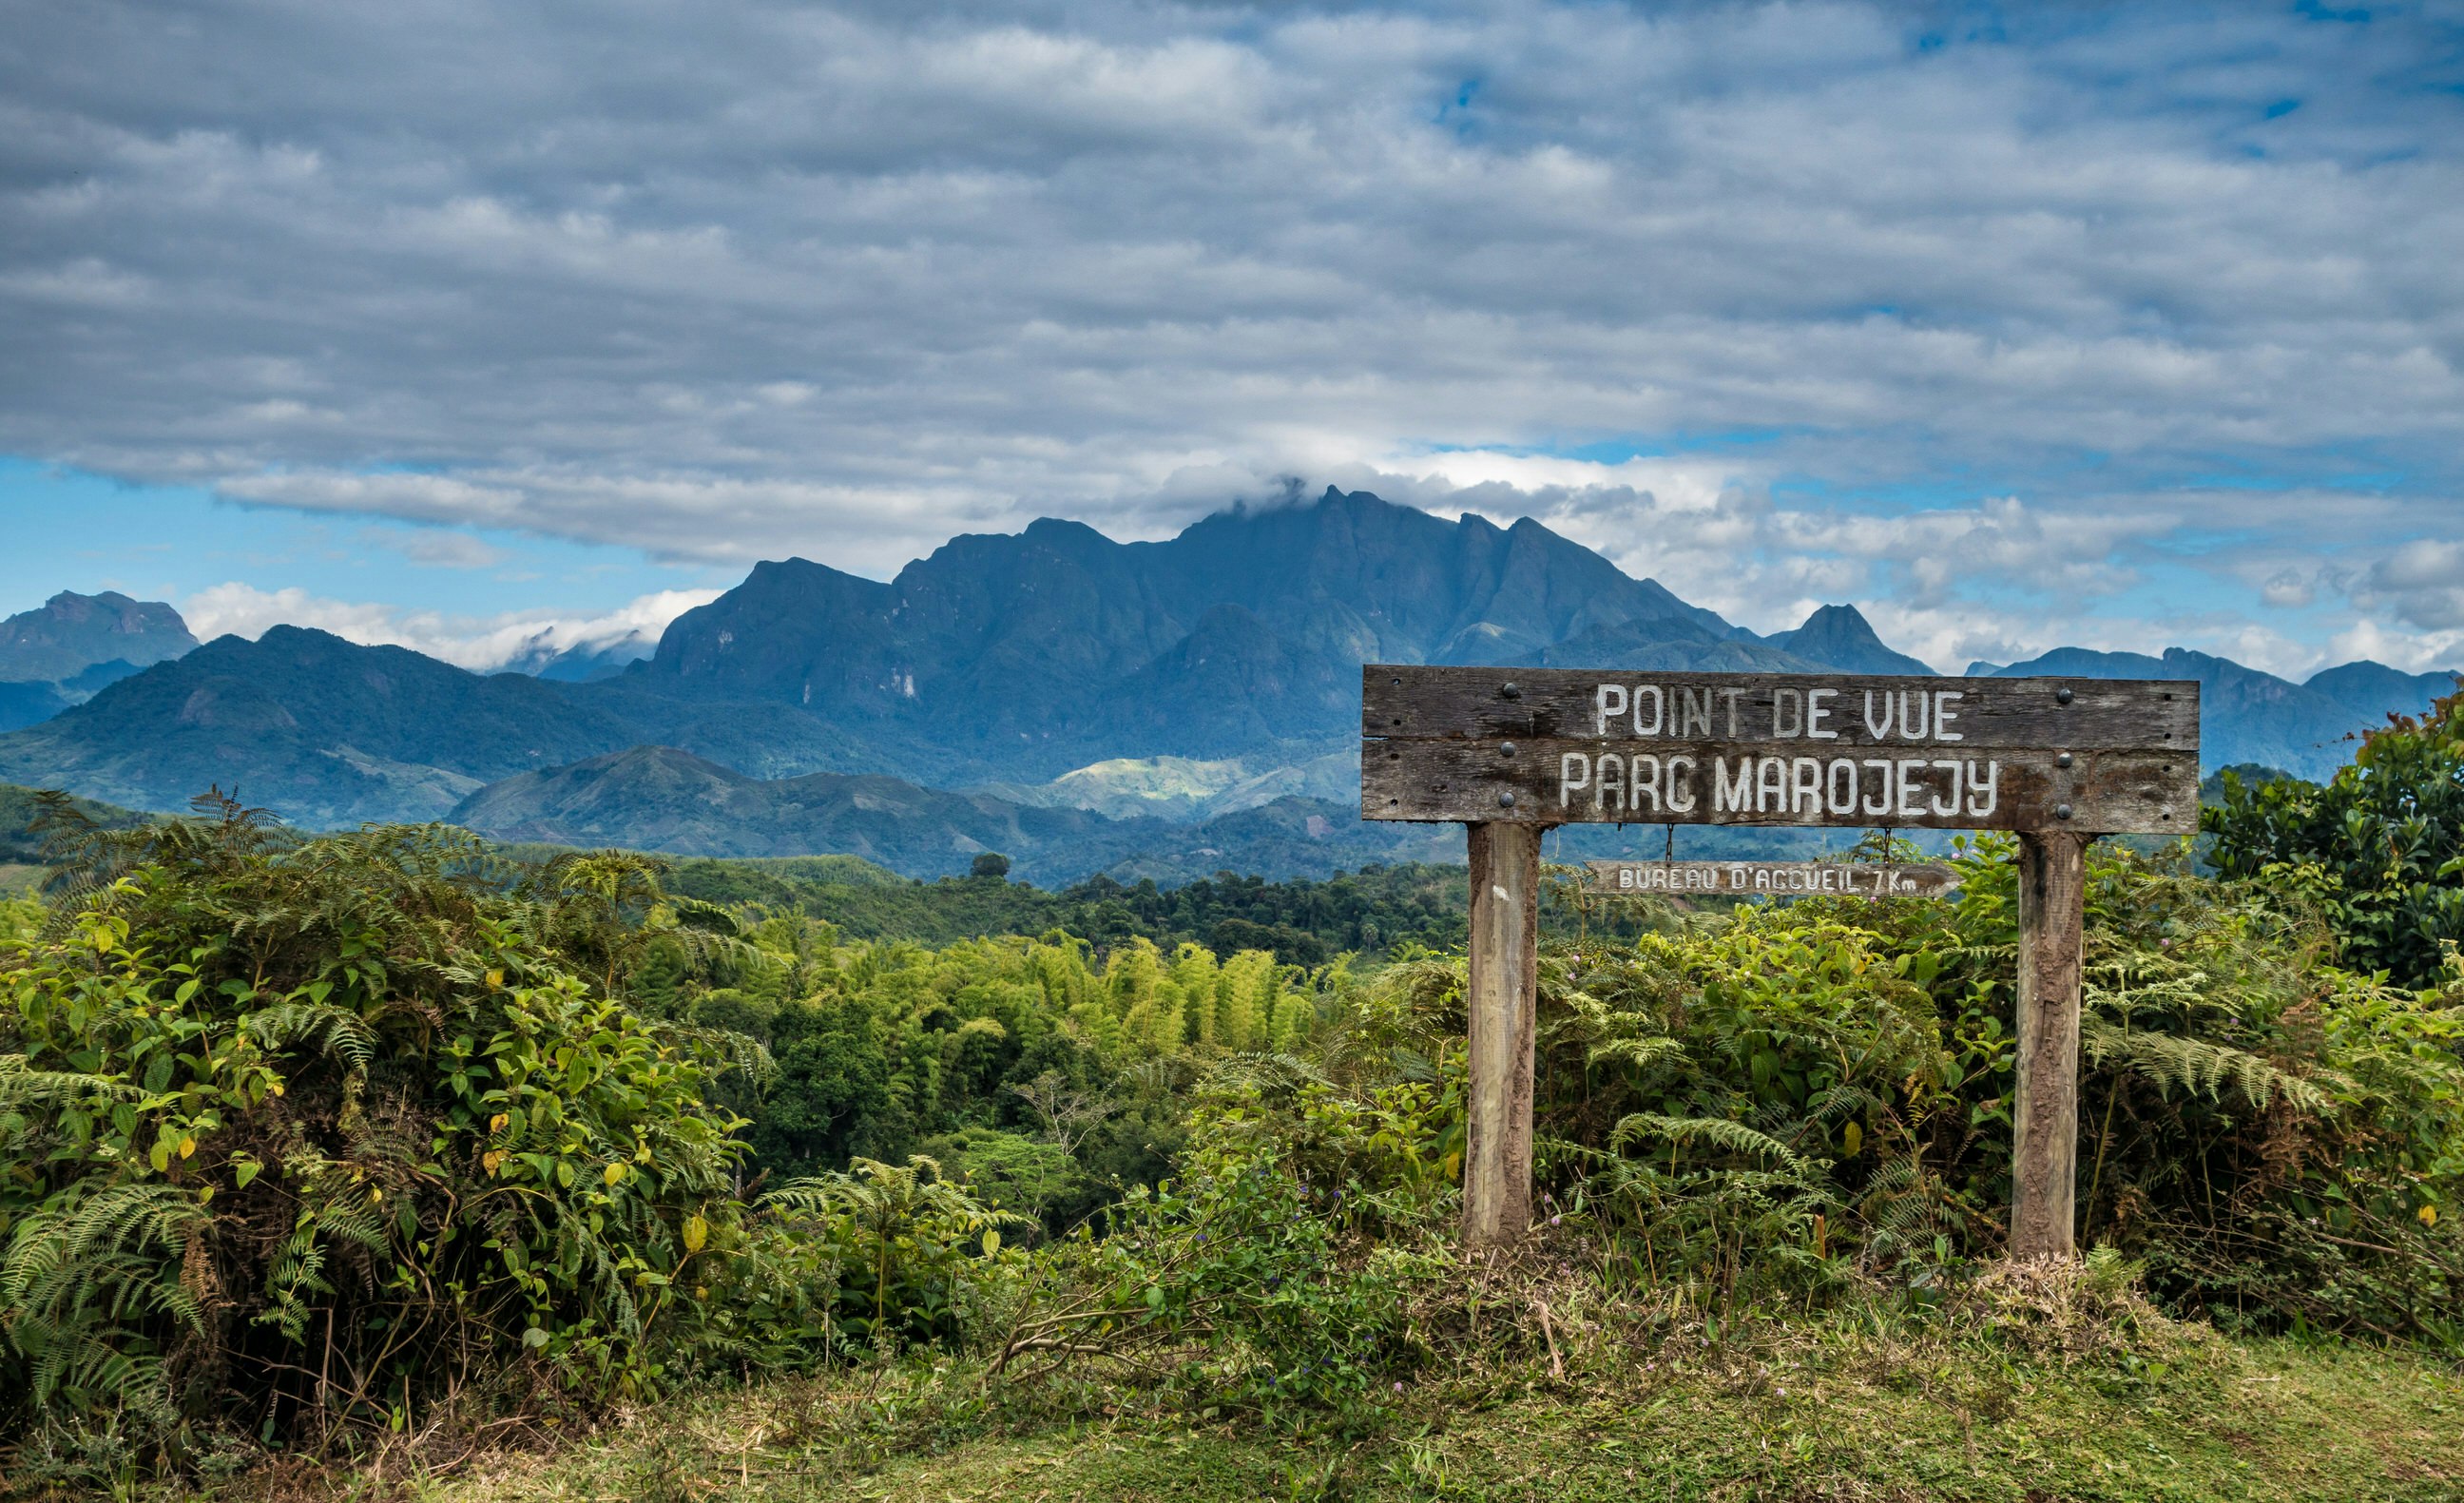 A well-worn wooden park sign stands in front of ferns, with forests and impressive mountains in the background.